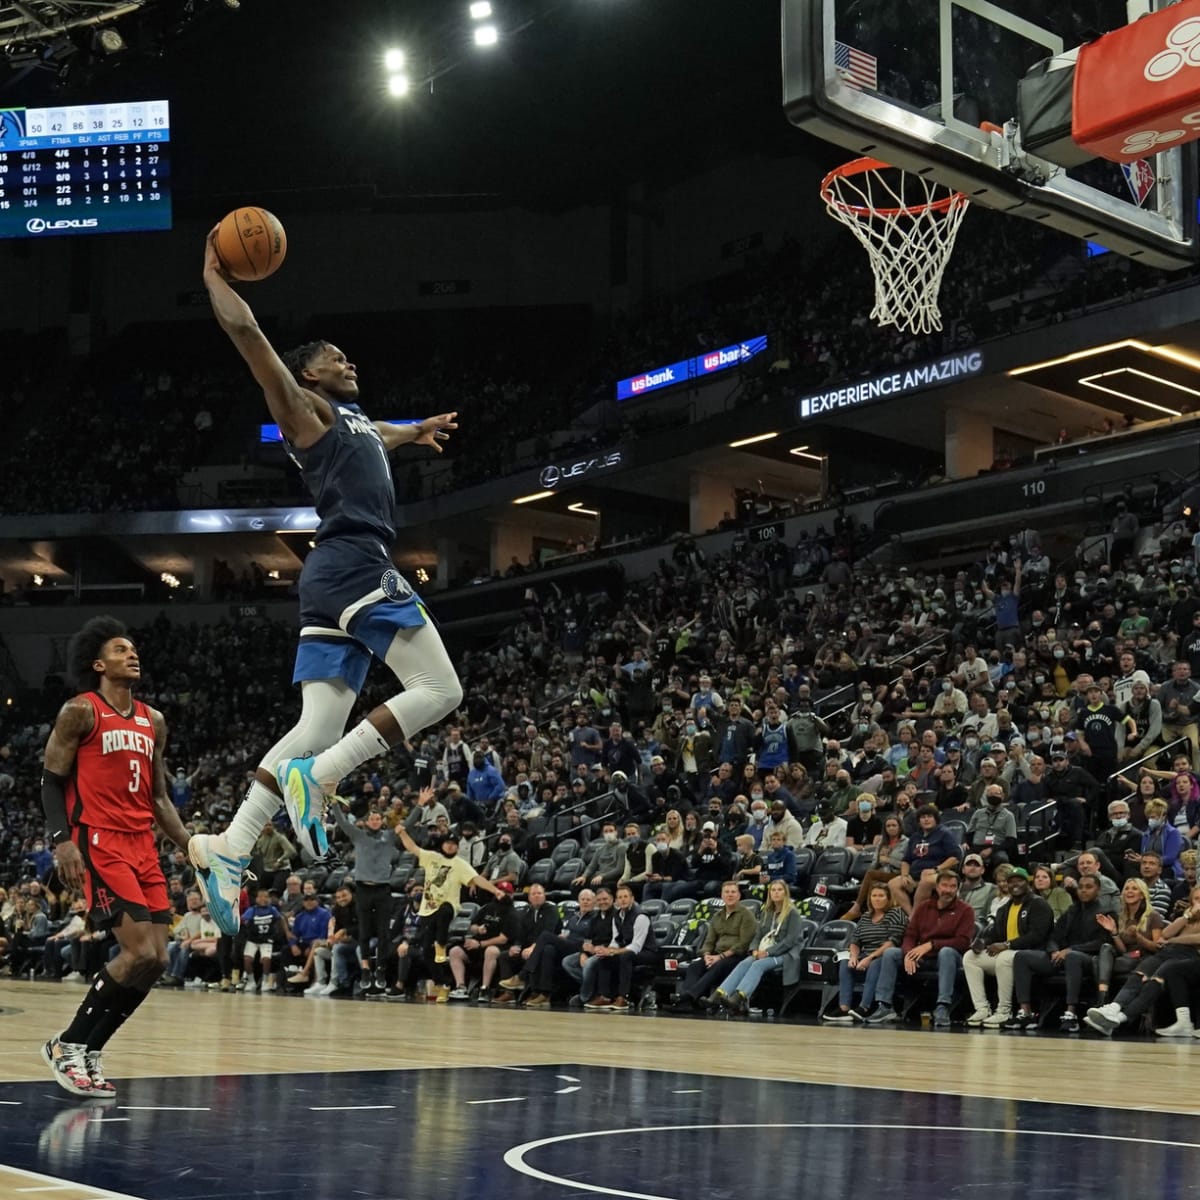 Minnesota Timberwolves: Anthony Edwards 2021 Dunk Poster - Officially